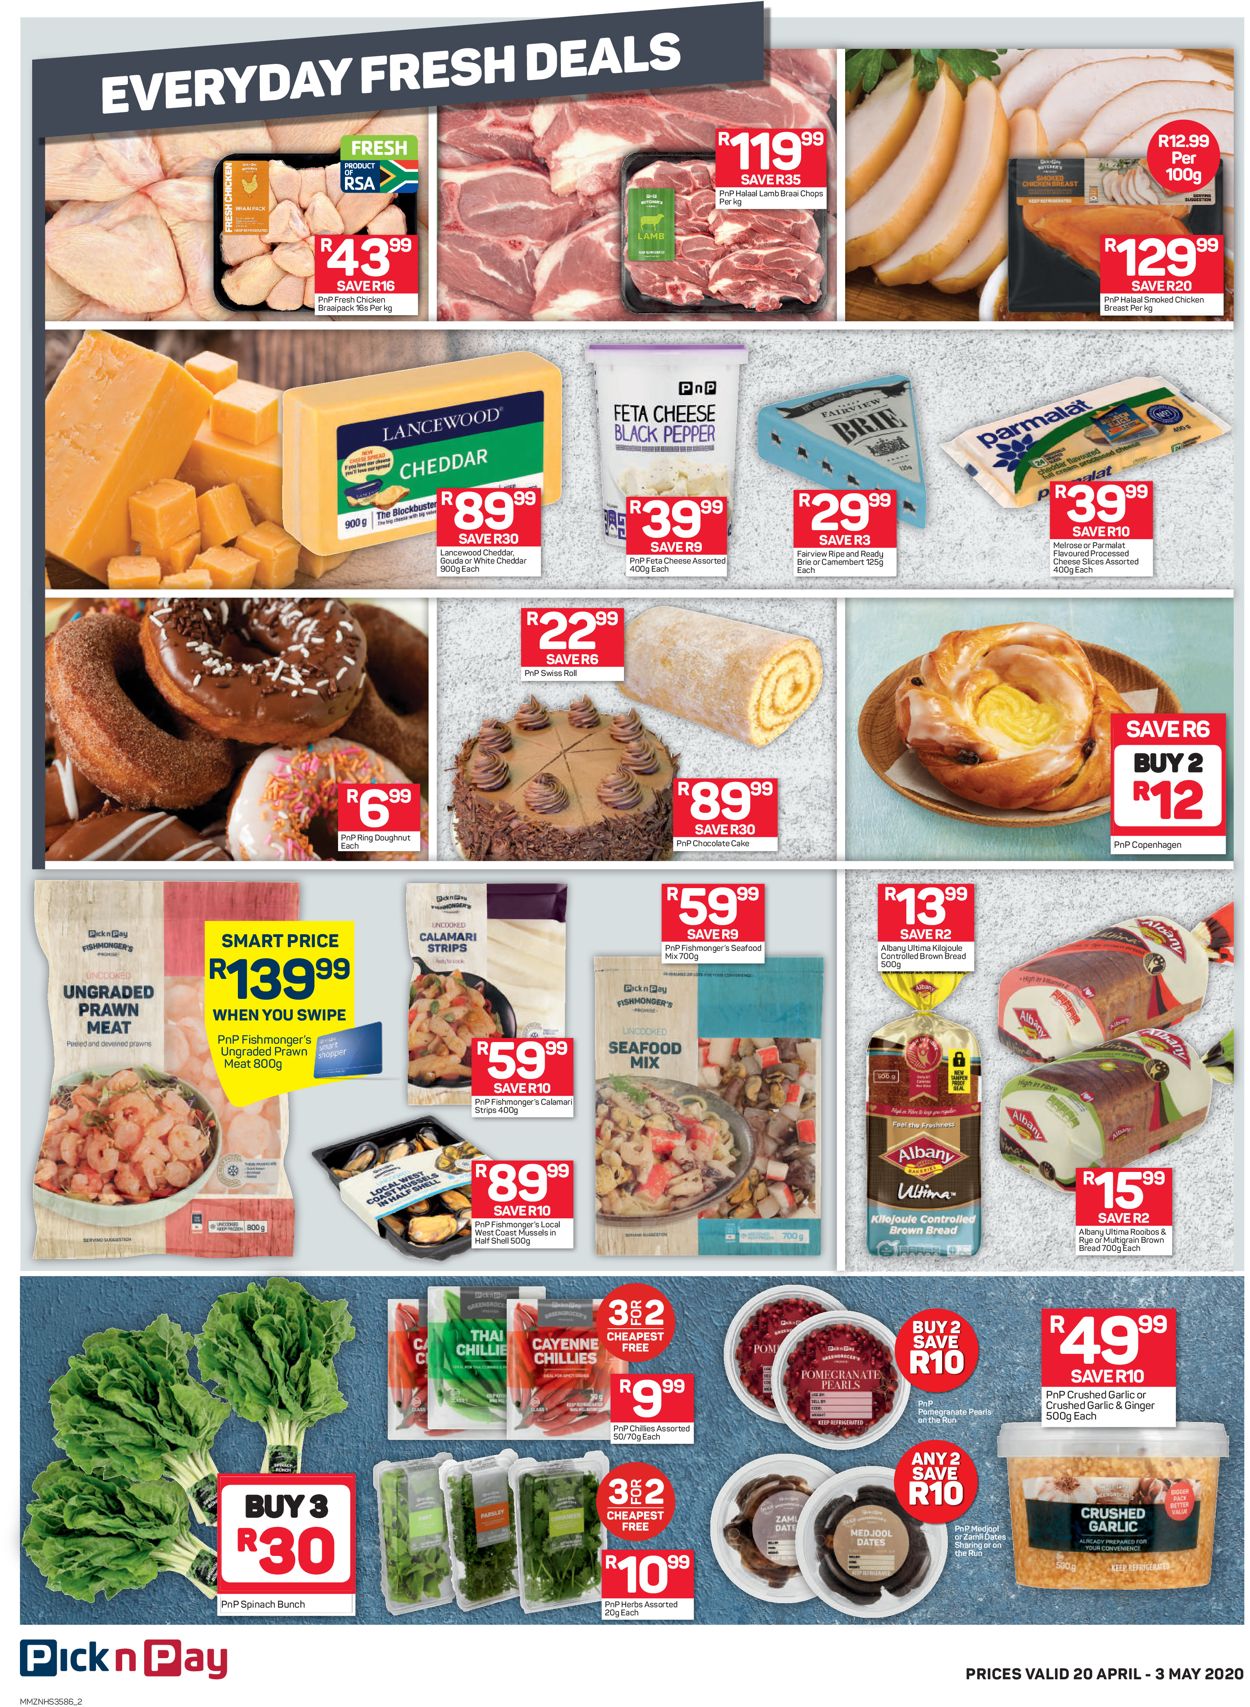 Pick n Pay Catalogue - 2020/04/20-2020/05/03 (Page 2)